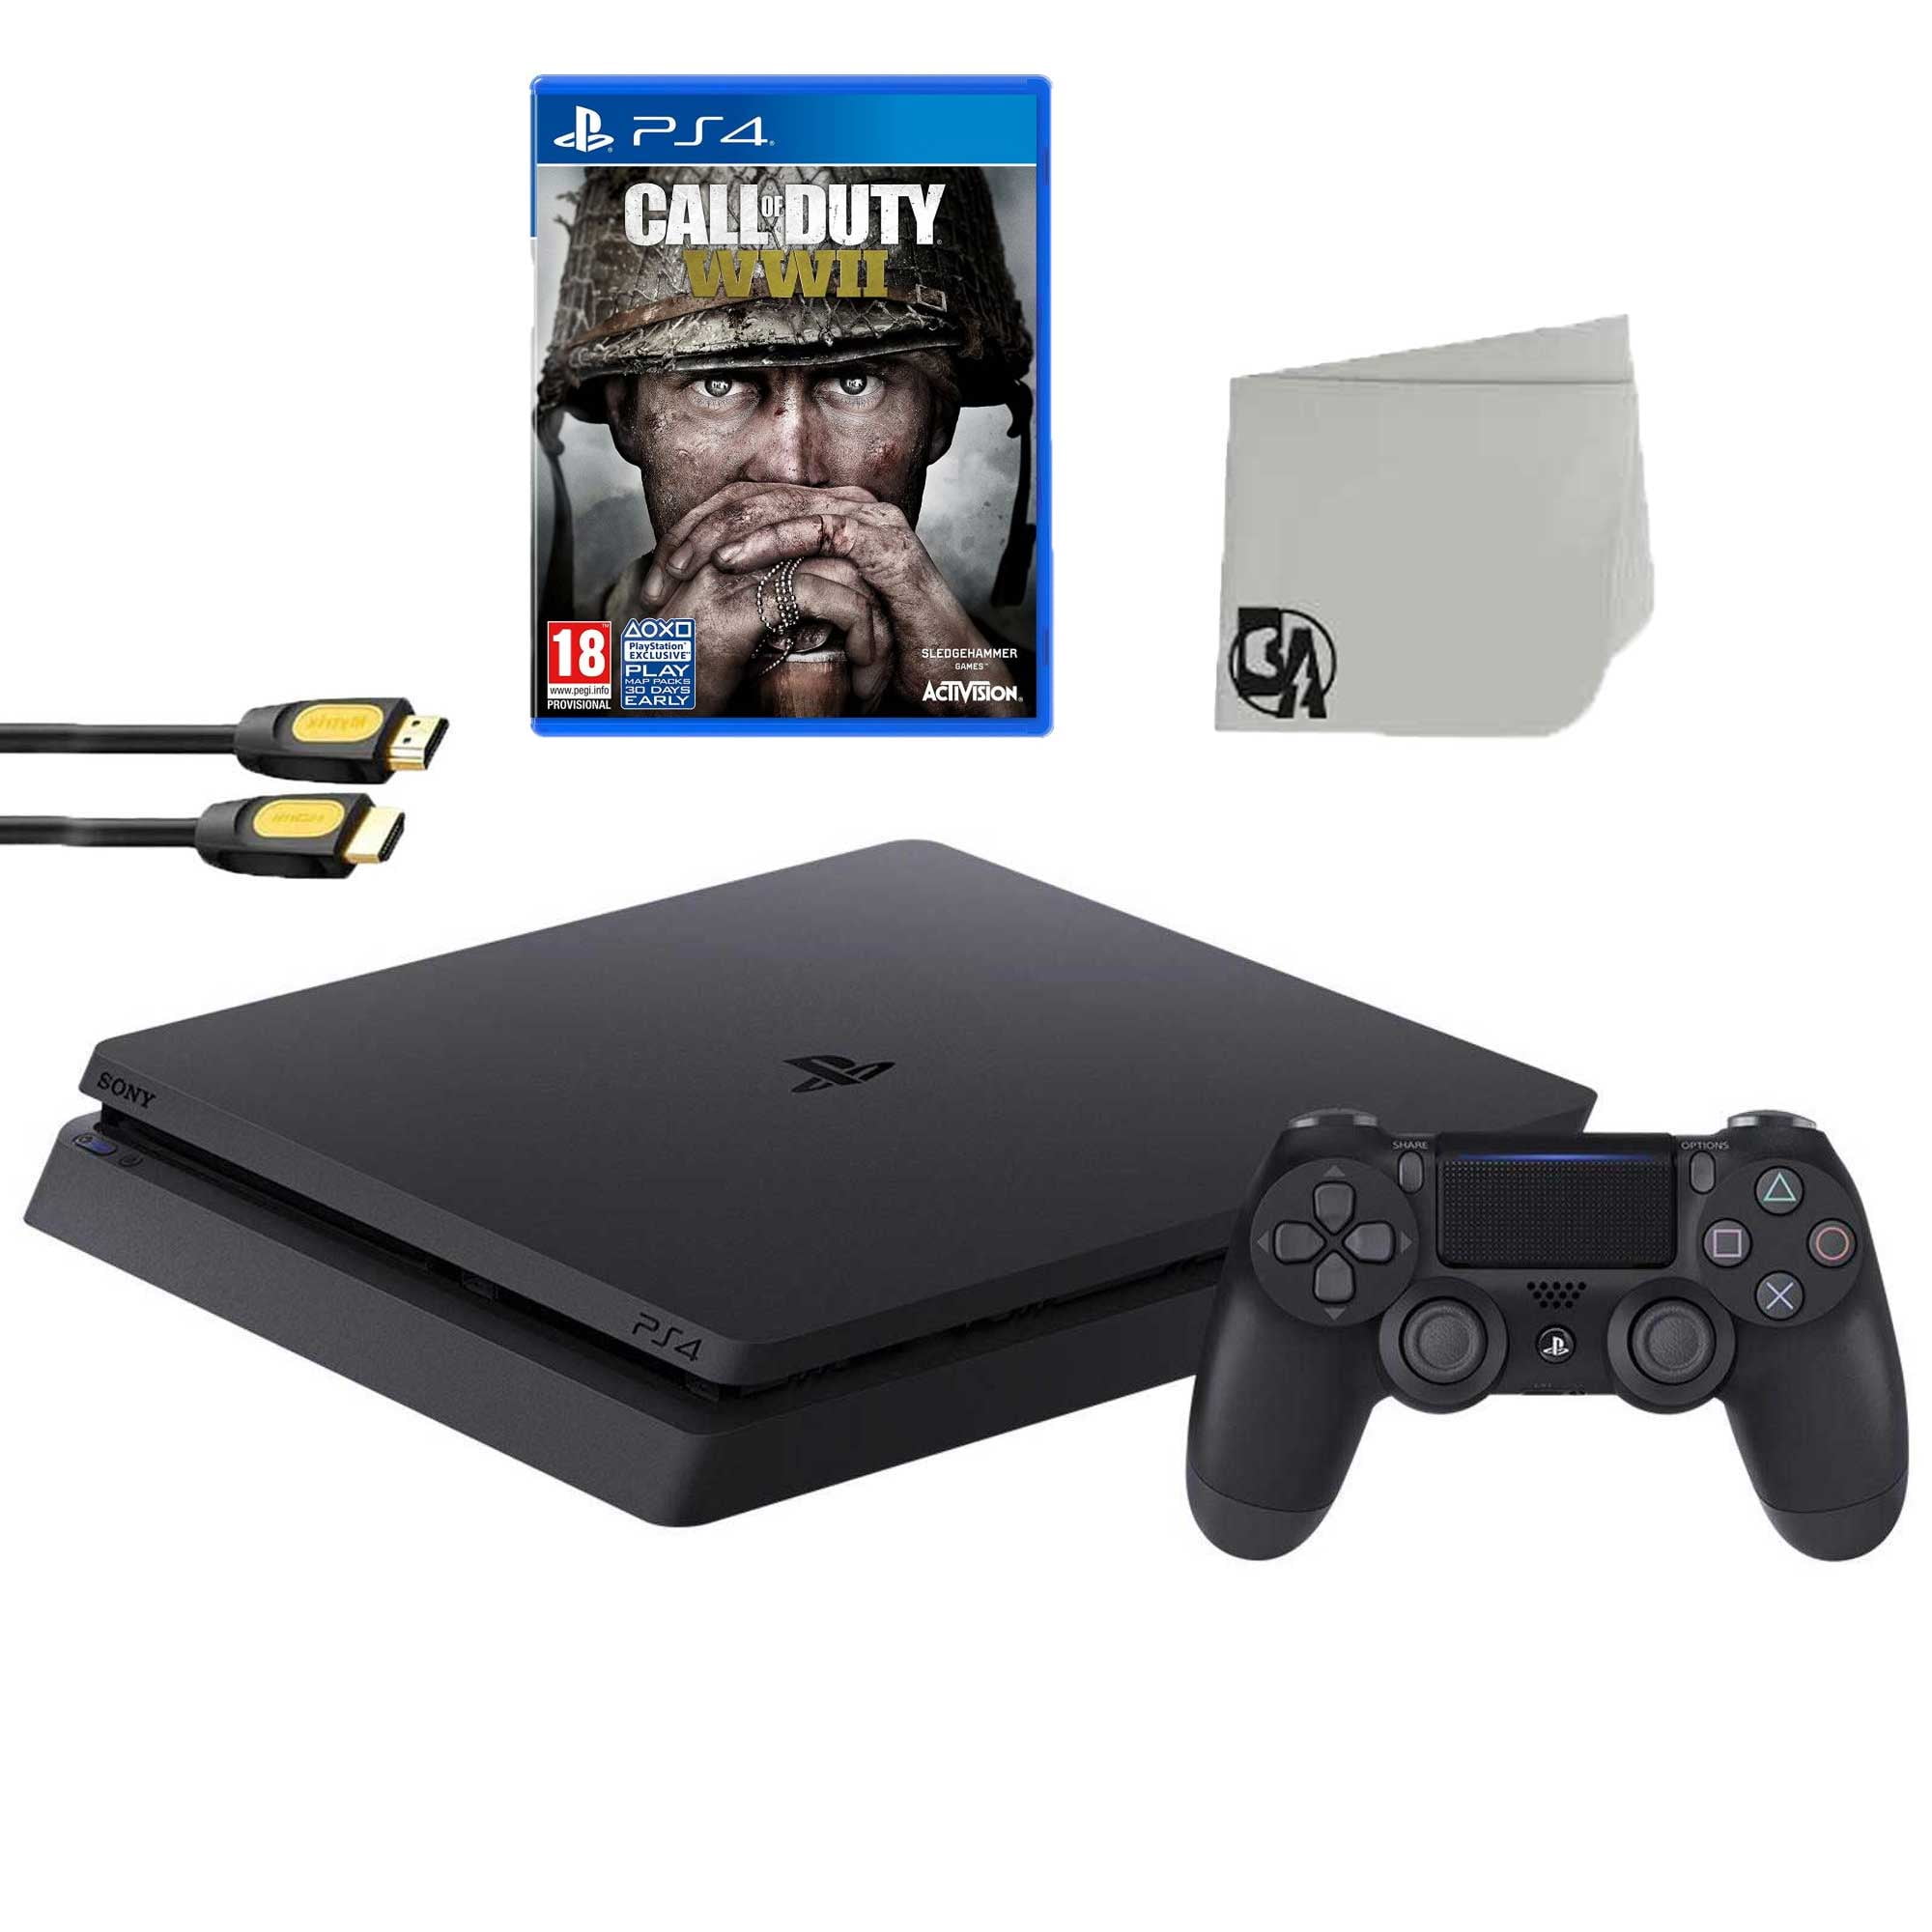 Opbevares i køleskab slot Scrupulous Sony 2215A PlayStation 4 Slim 500GB Gaming Console Black with Call of Duty  WW2 Game BOLT AXTION Bundle Lke New - Walmart.com